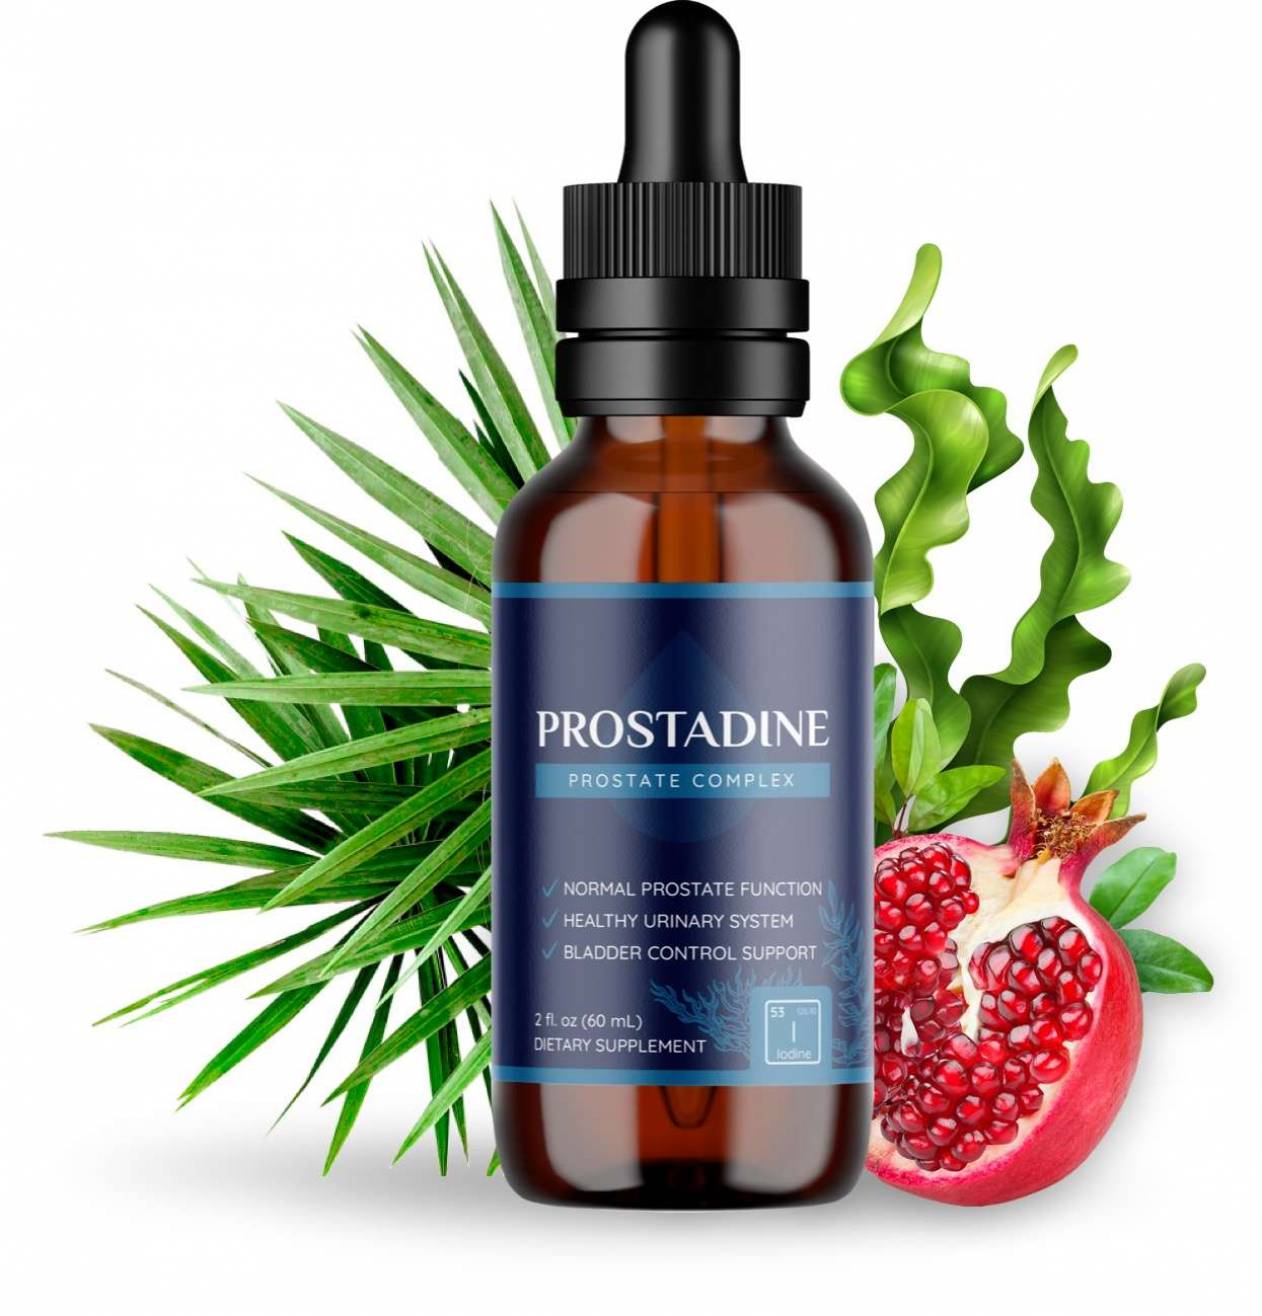 What Is The Best Place To Get Prostadine